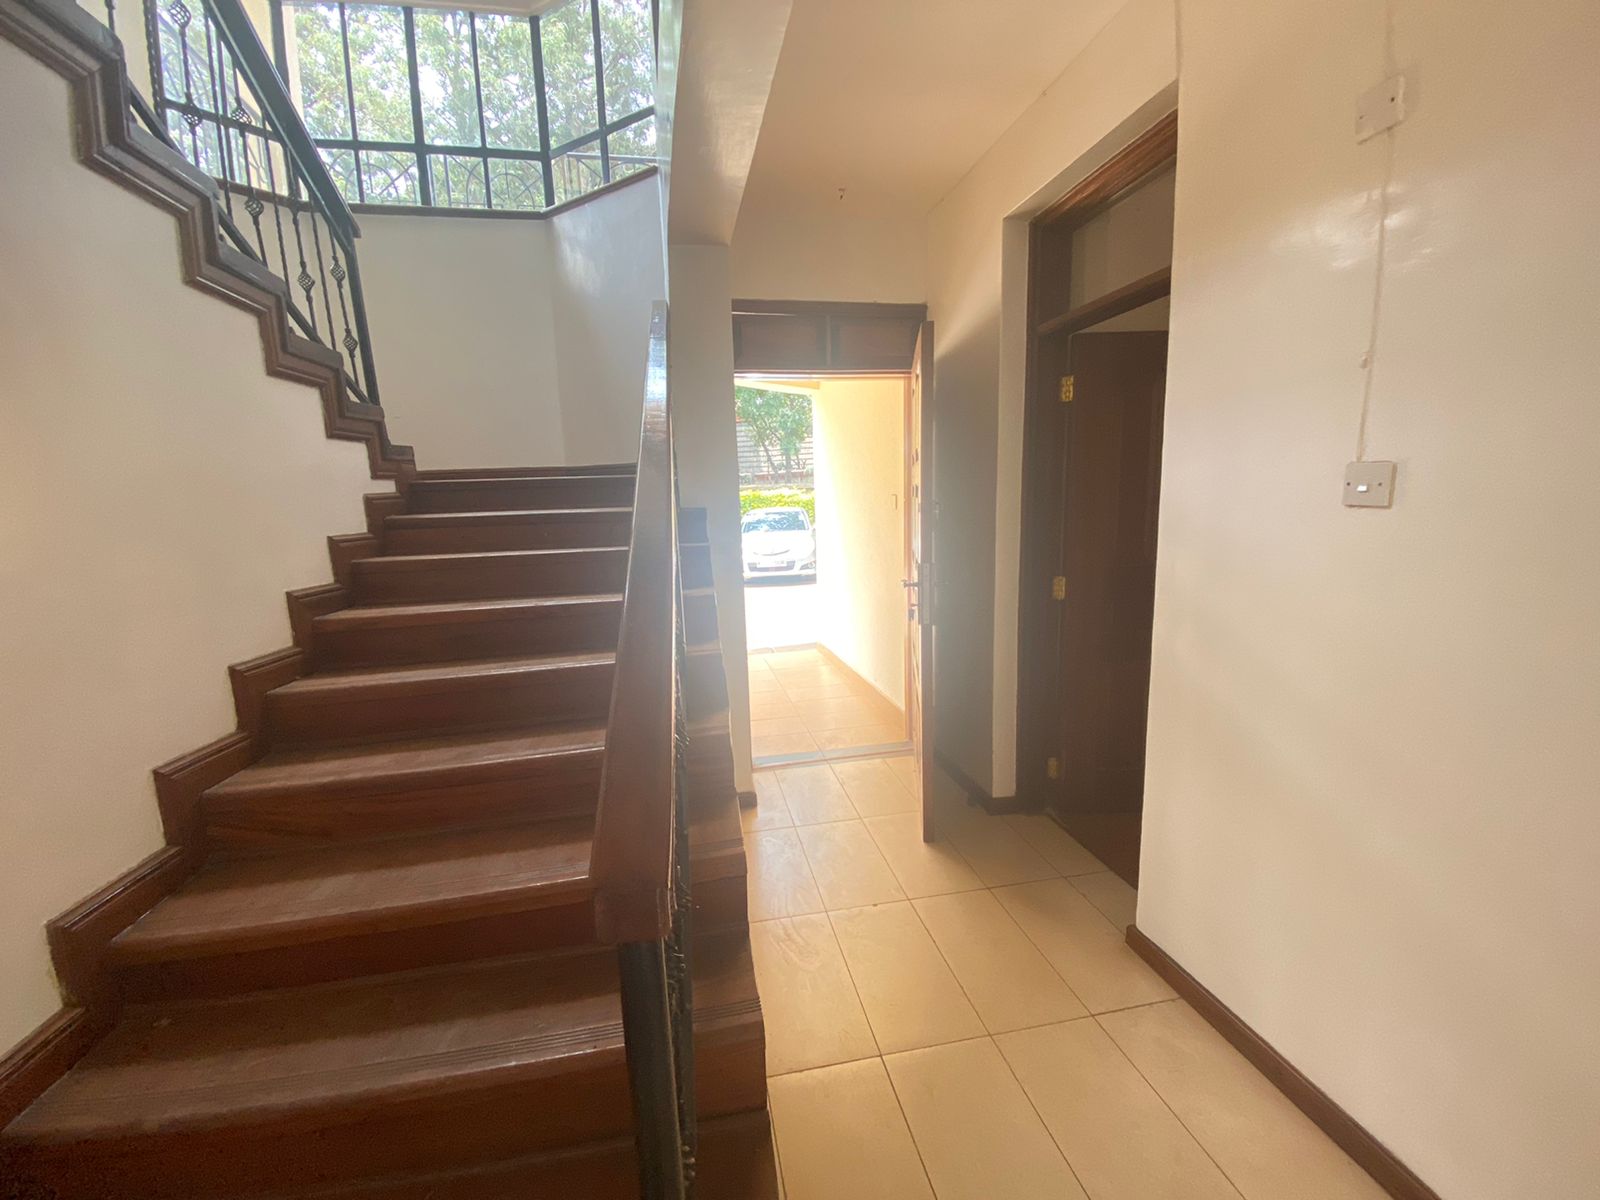 5 bedroom House in lavington all ensuite plus dsq for Sale at Ksh47m Negotiable (14)